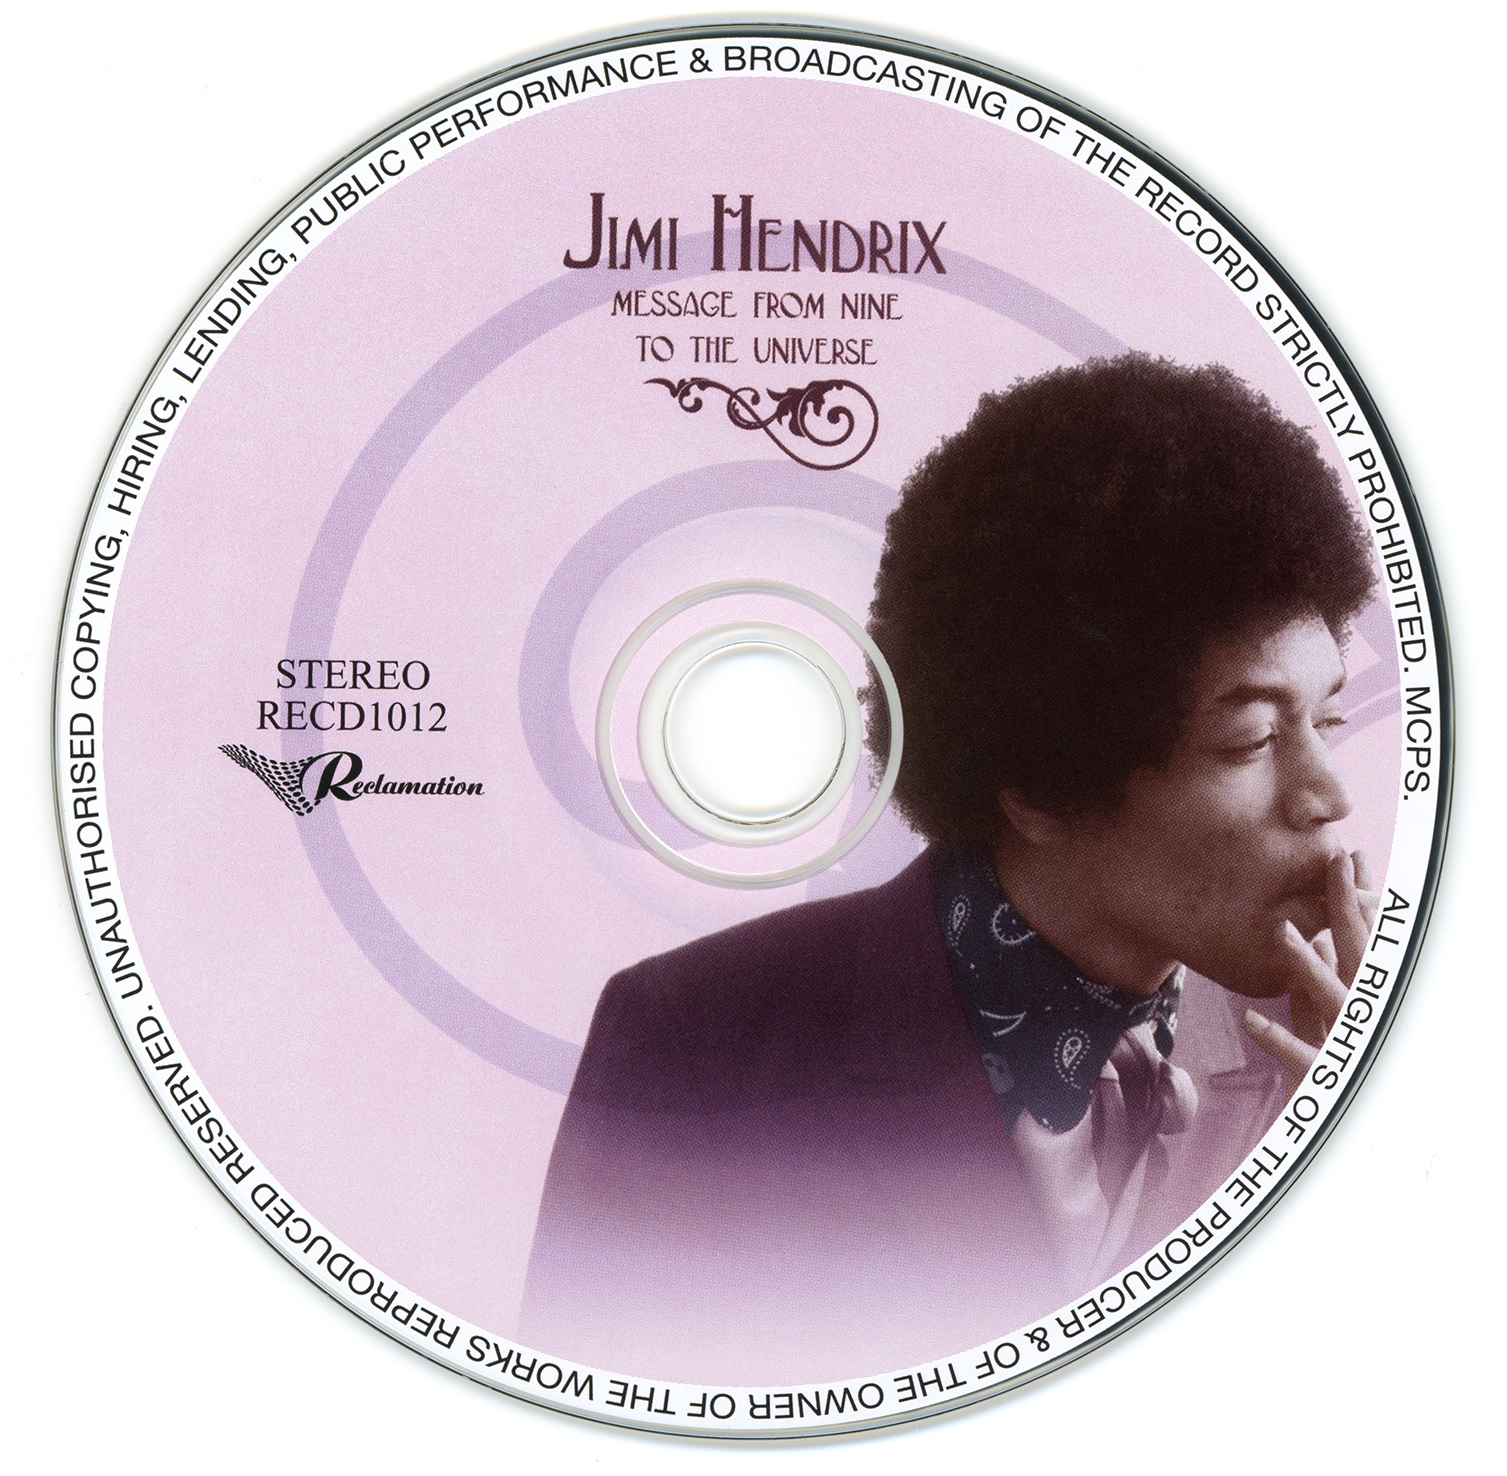 Jimi Hendrix – Message From Nine To The Universe – Jerry Scott